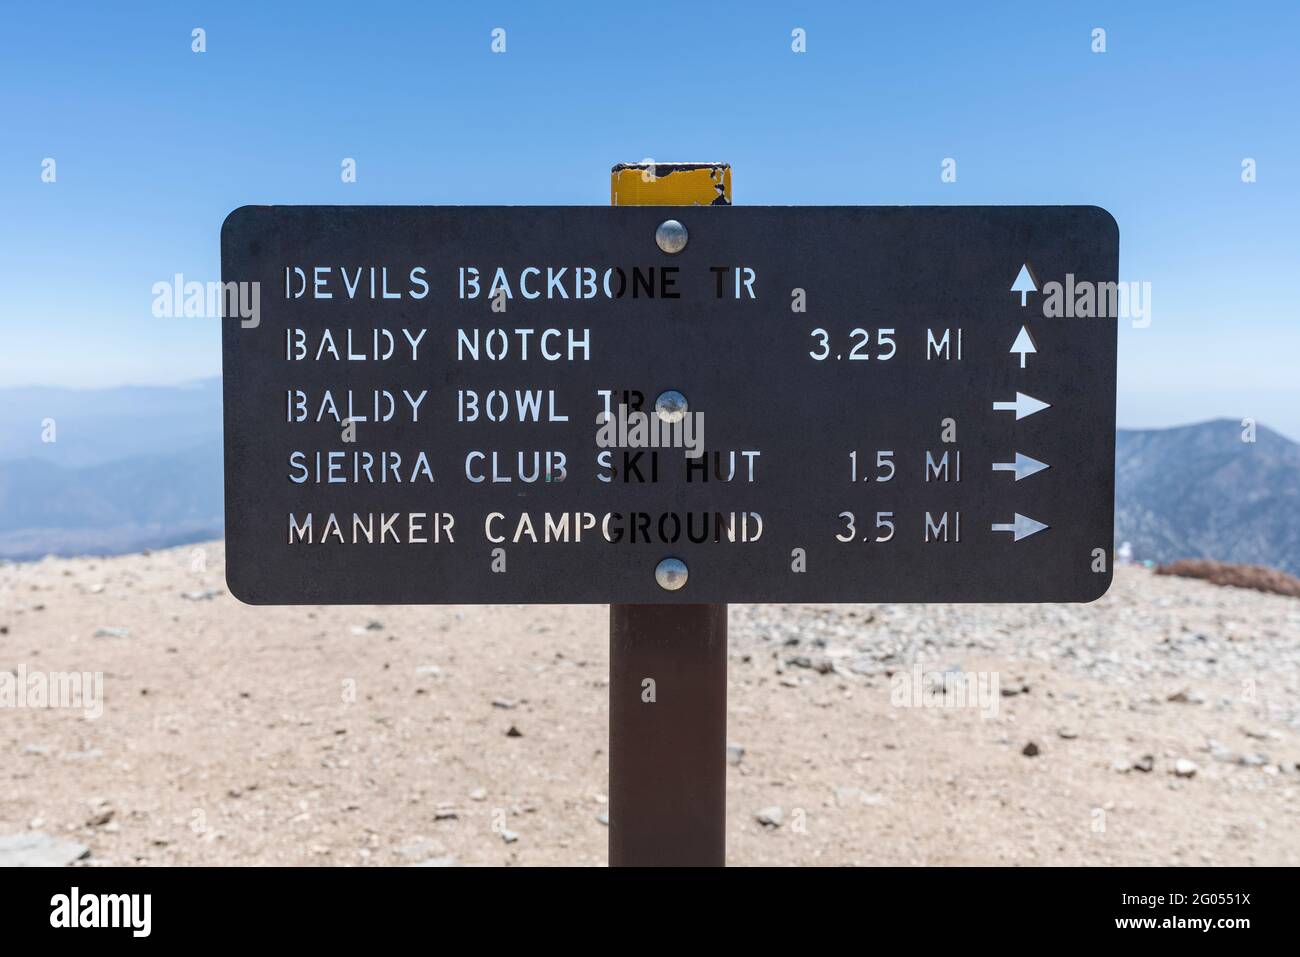 Mt Baldy, California, USA - May 23, 2021:  View of Devils Backbone trail sign on the summit of Mt Baldy in the San Gabriel Mountains. Stock Photo